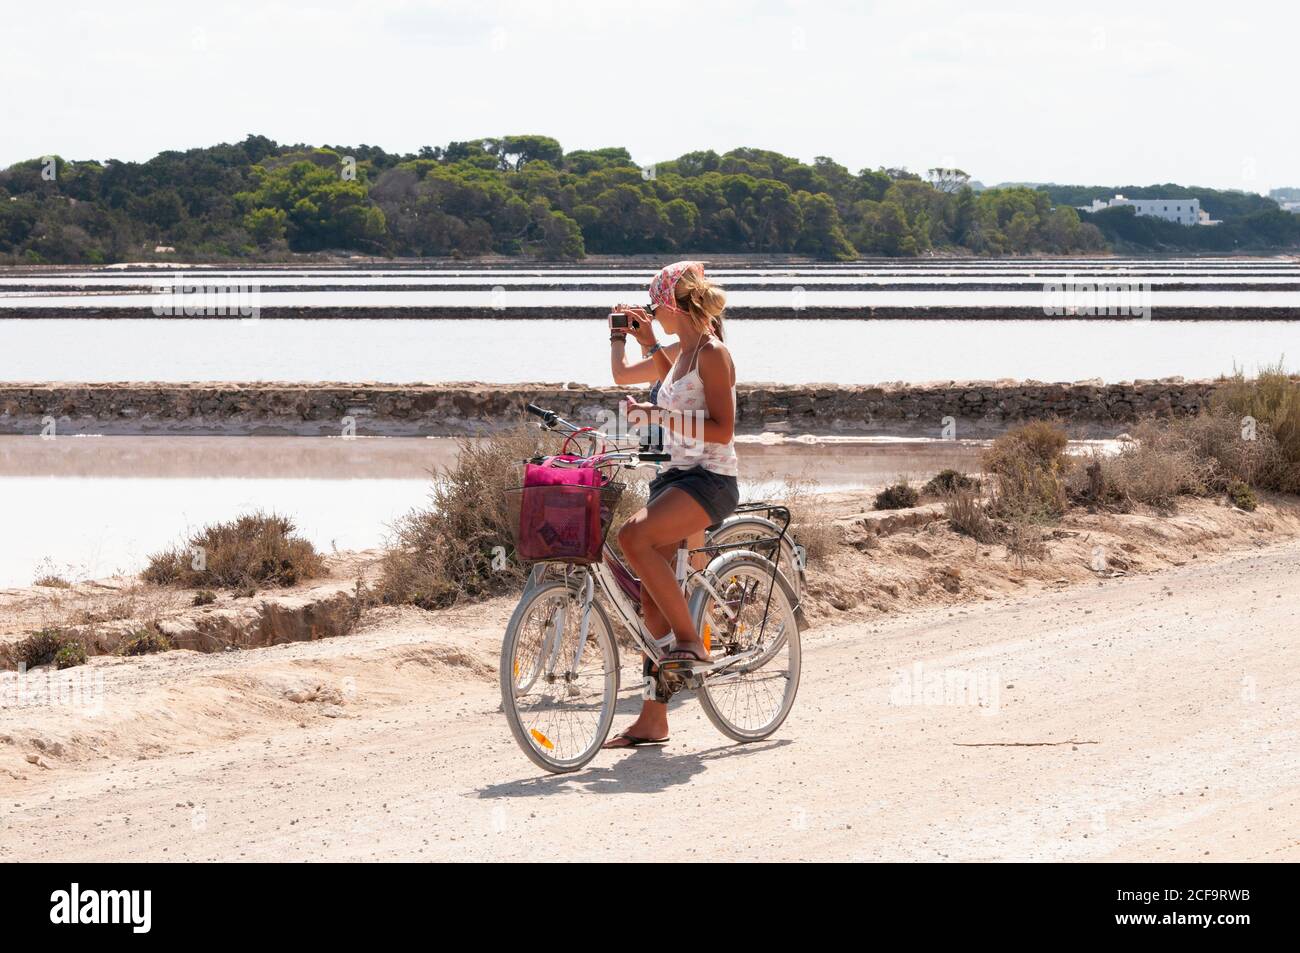 Two beautiful girls on bicycles ride the salt flats of the island of Formentera, Spain, Mediterranean island. Girl photographs the island landscape wi Stock Photo